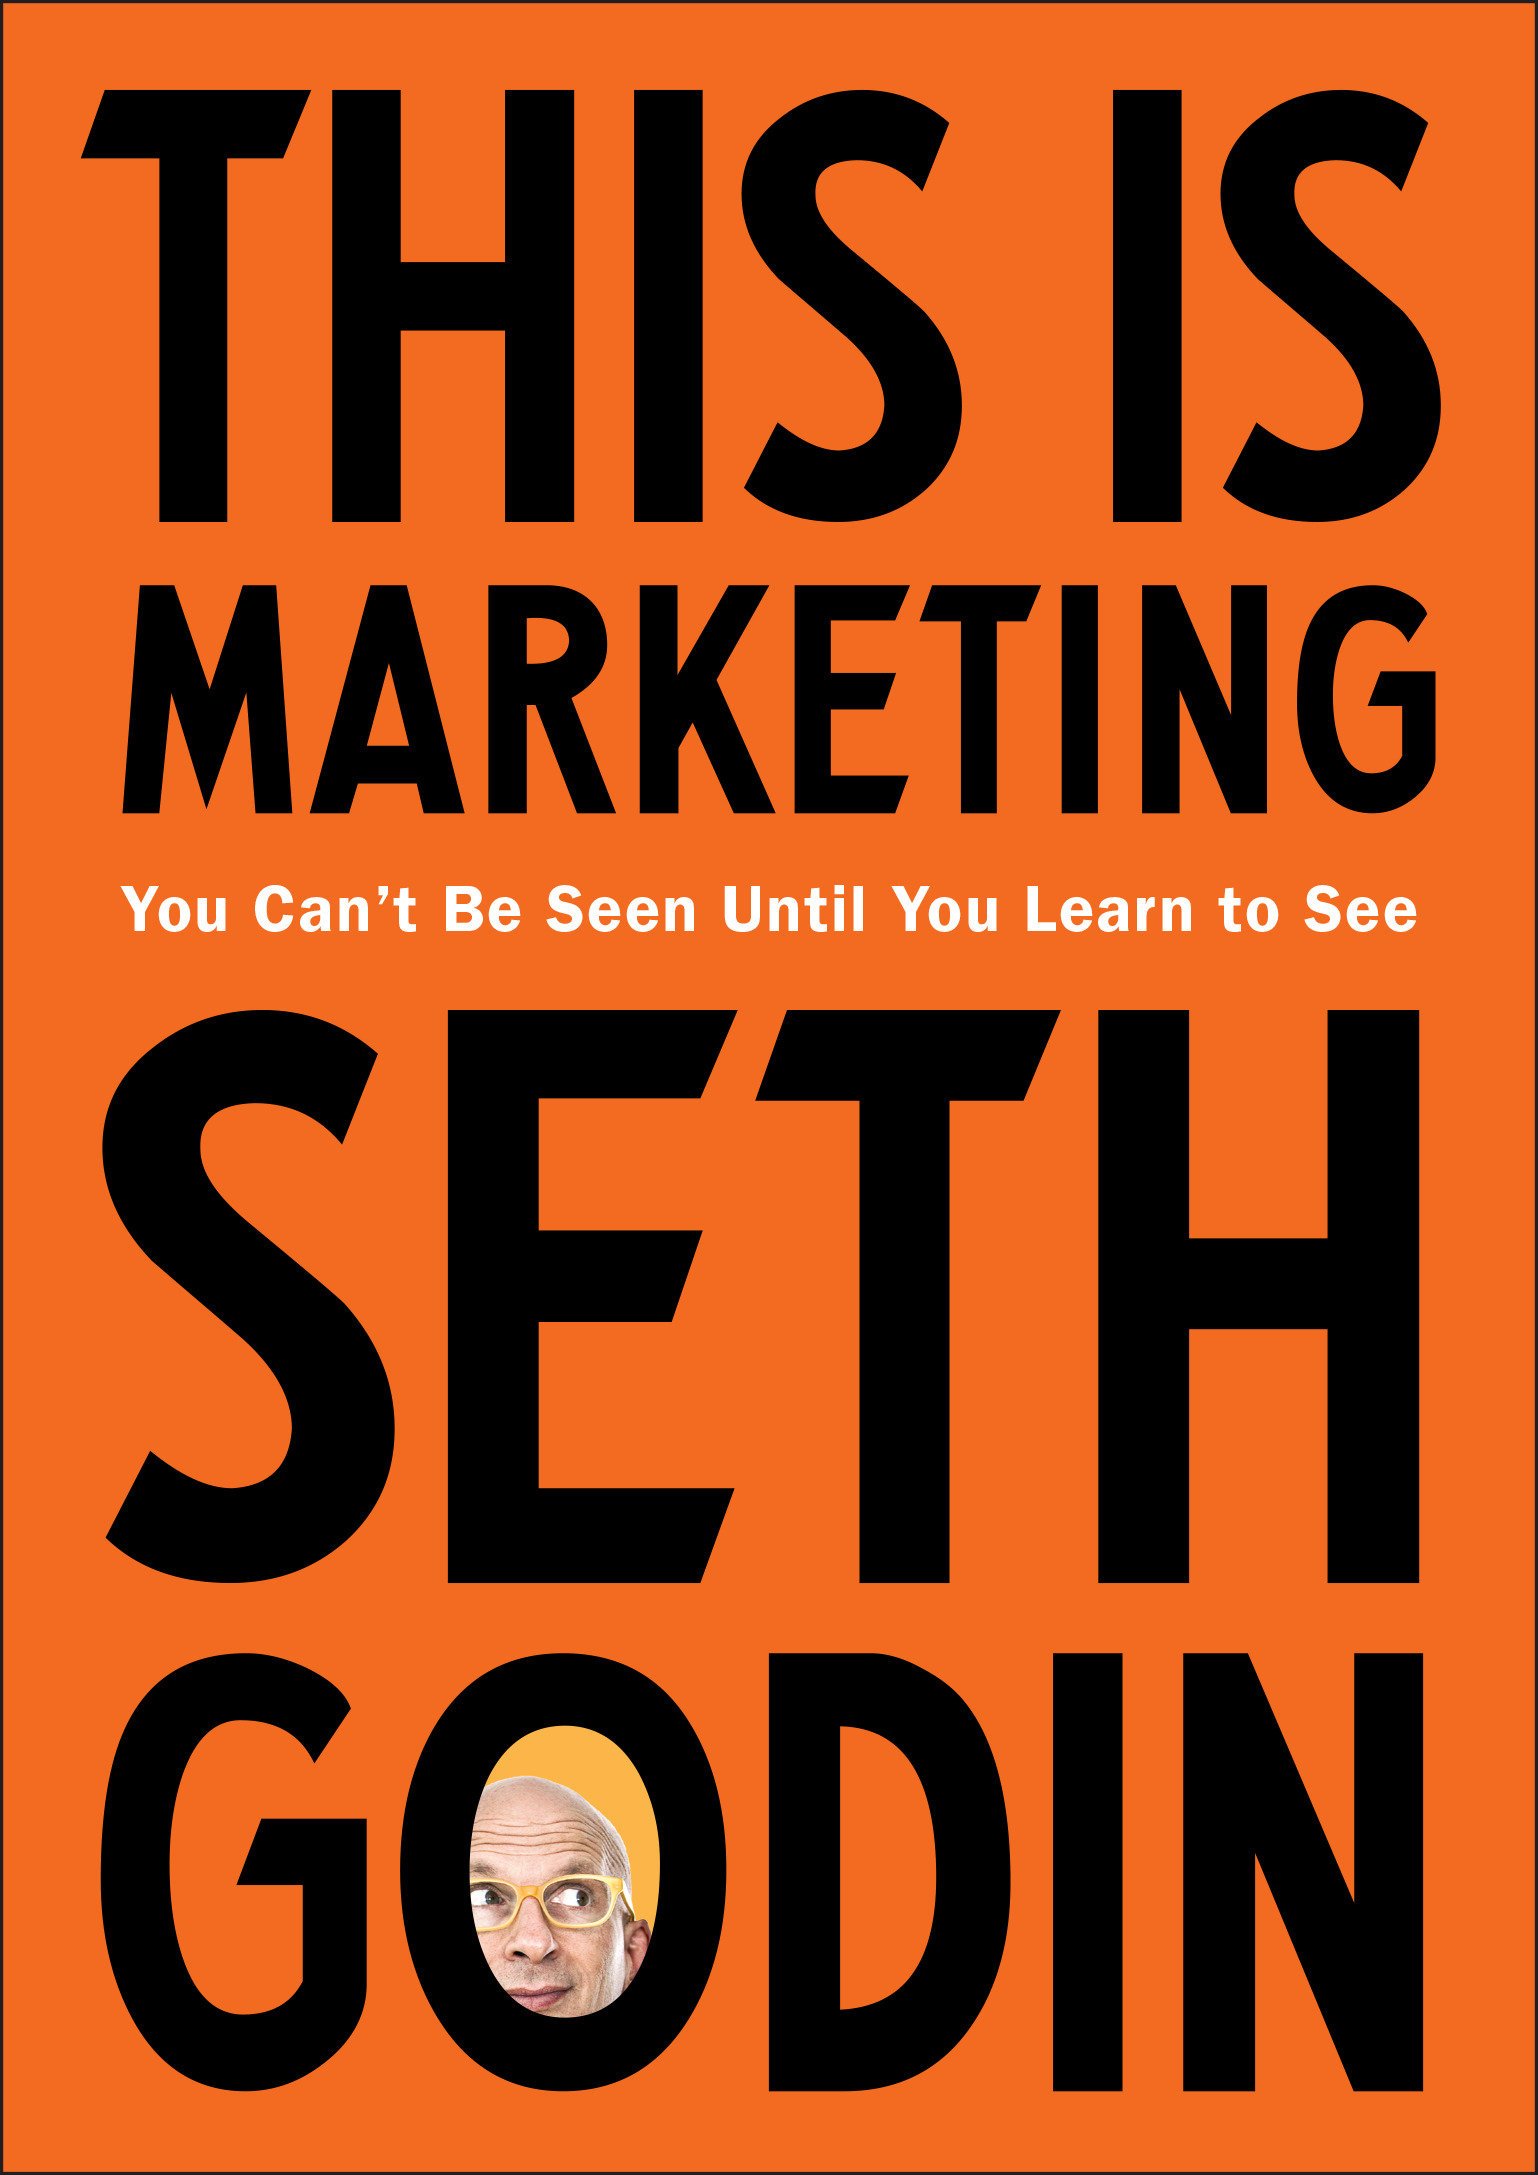 Books every marketer should read: This is Marketing